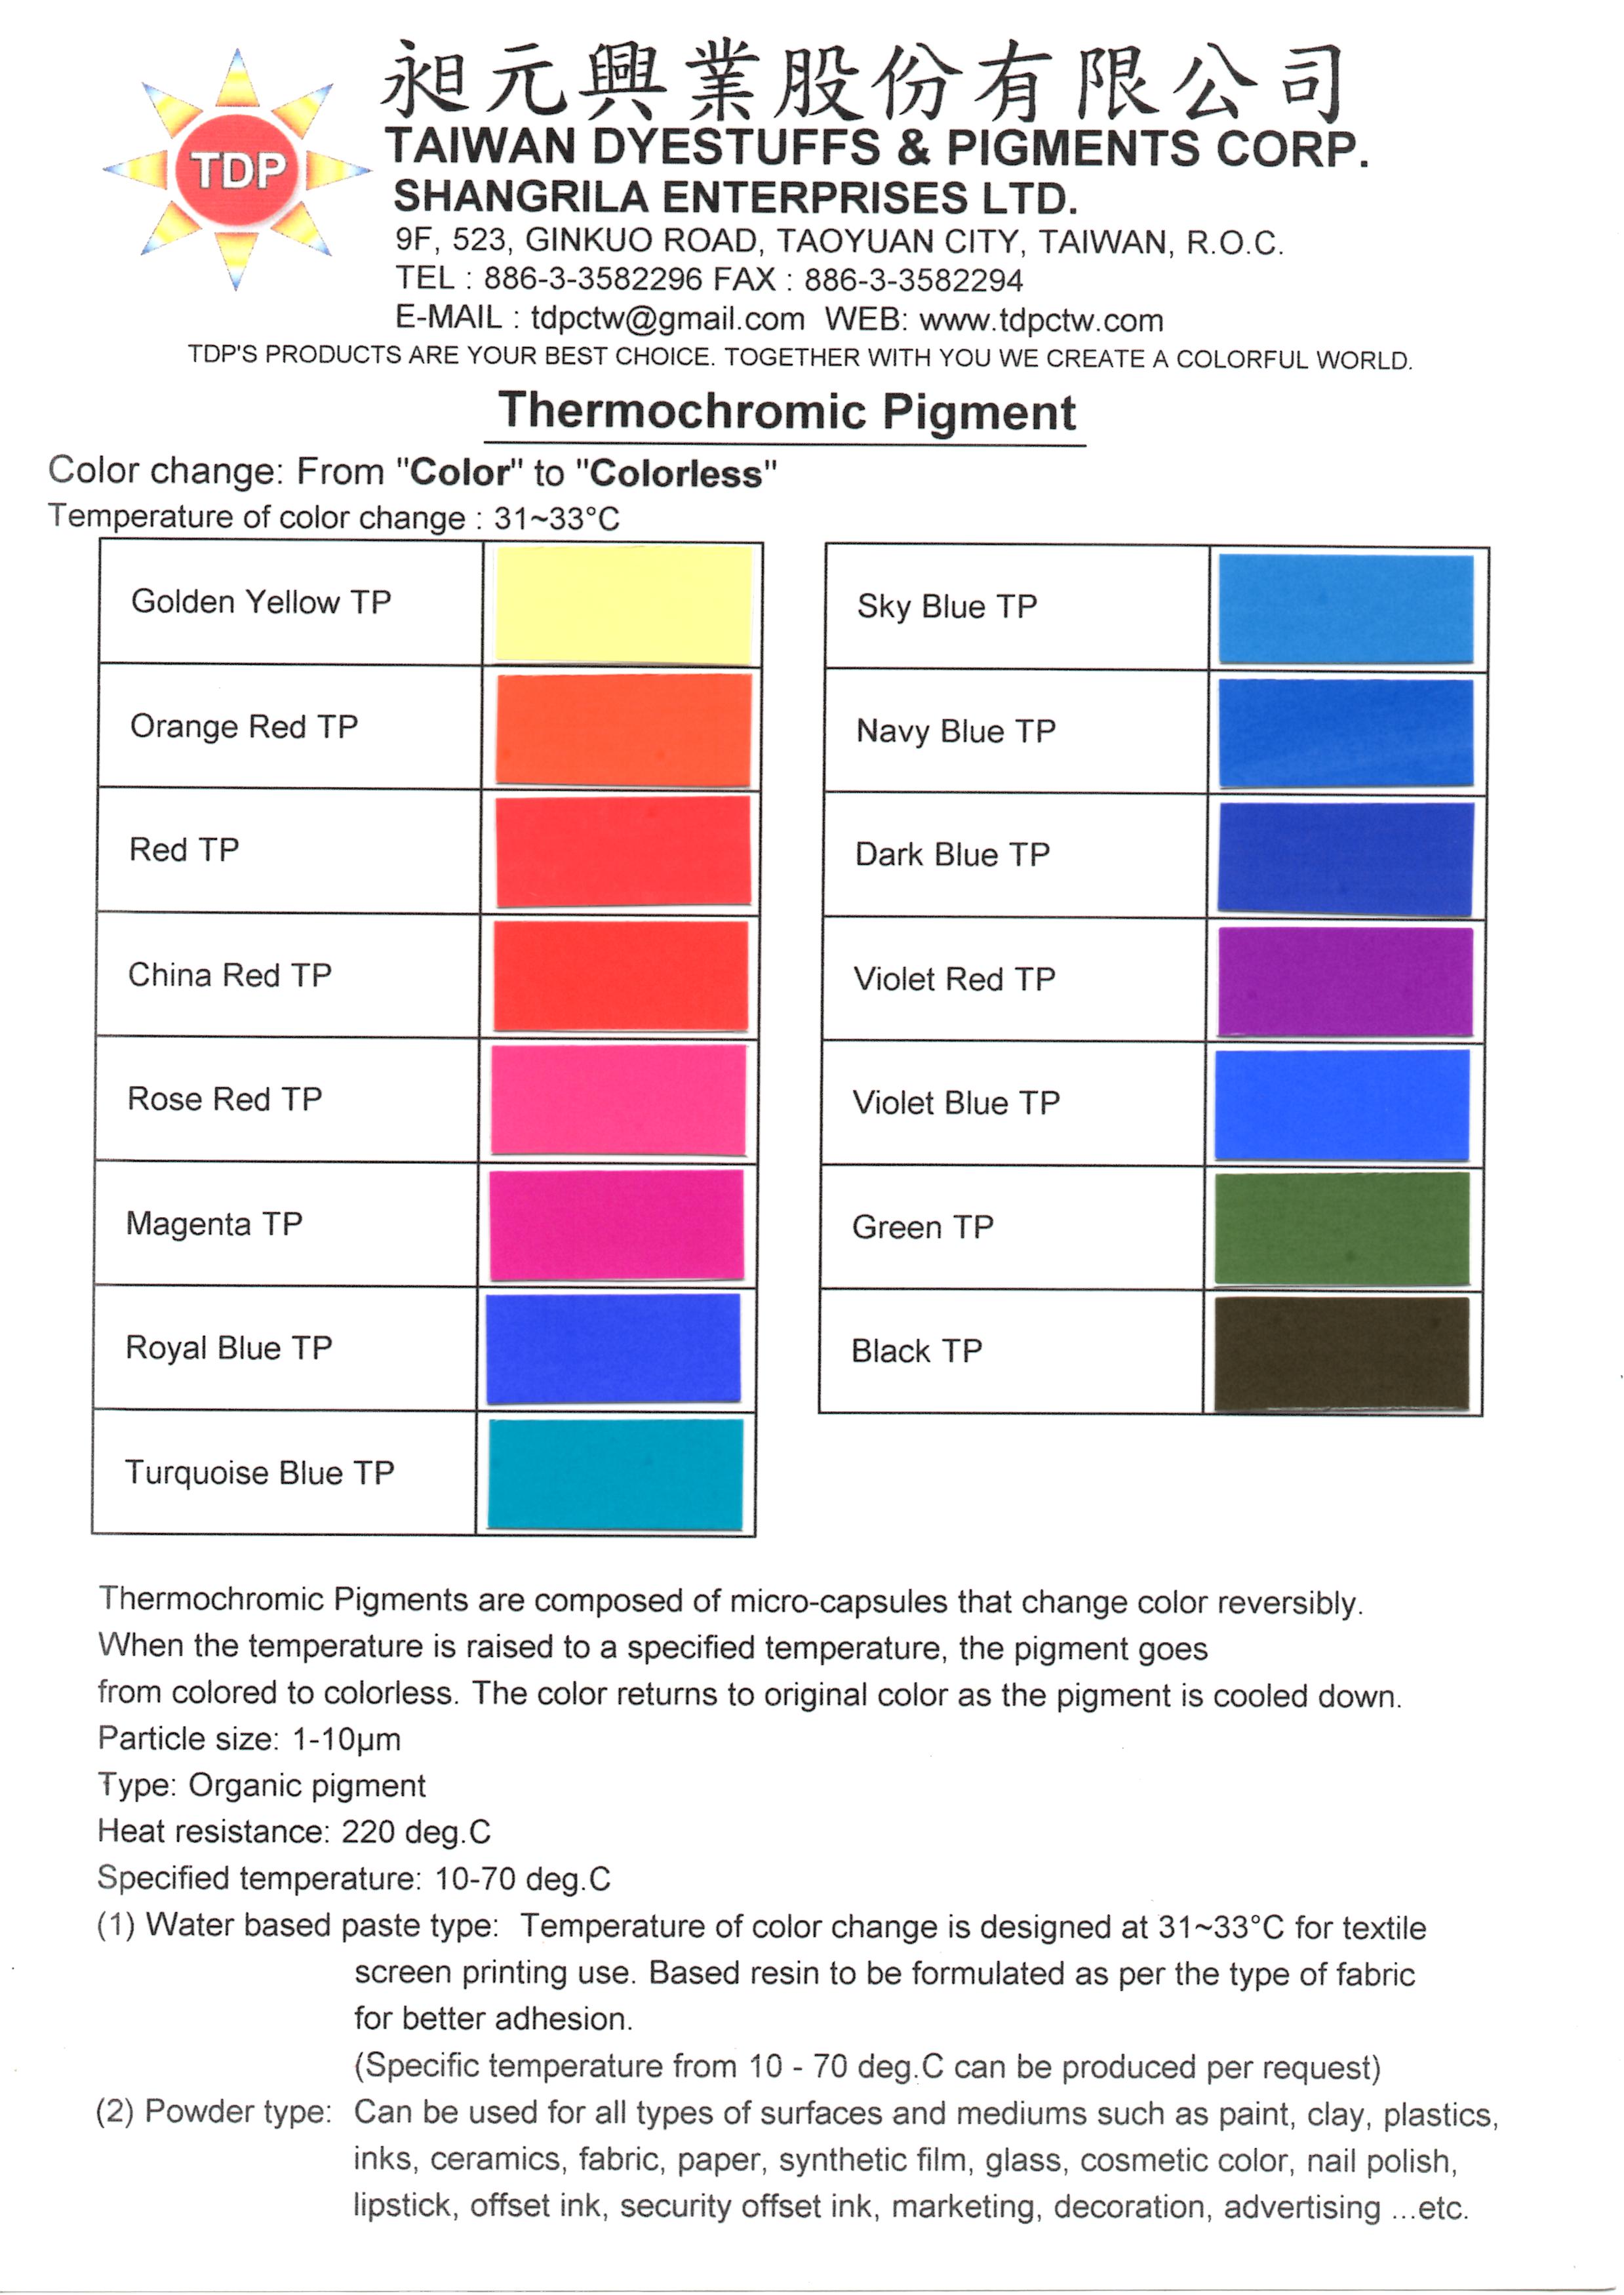 Thermochromic Pigment - Taiwan Dyestuffs & Pigments Corp.